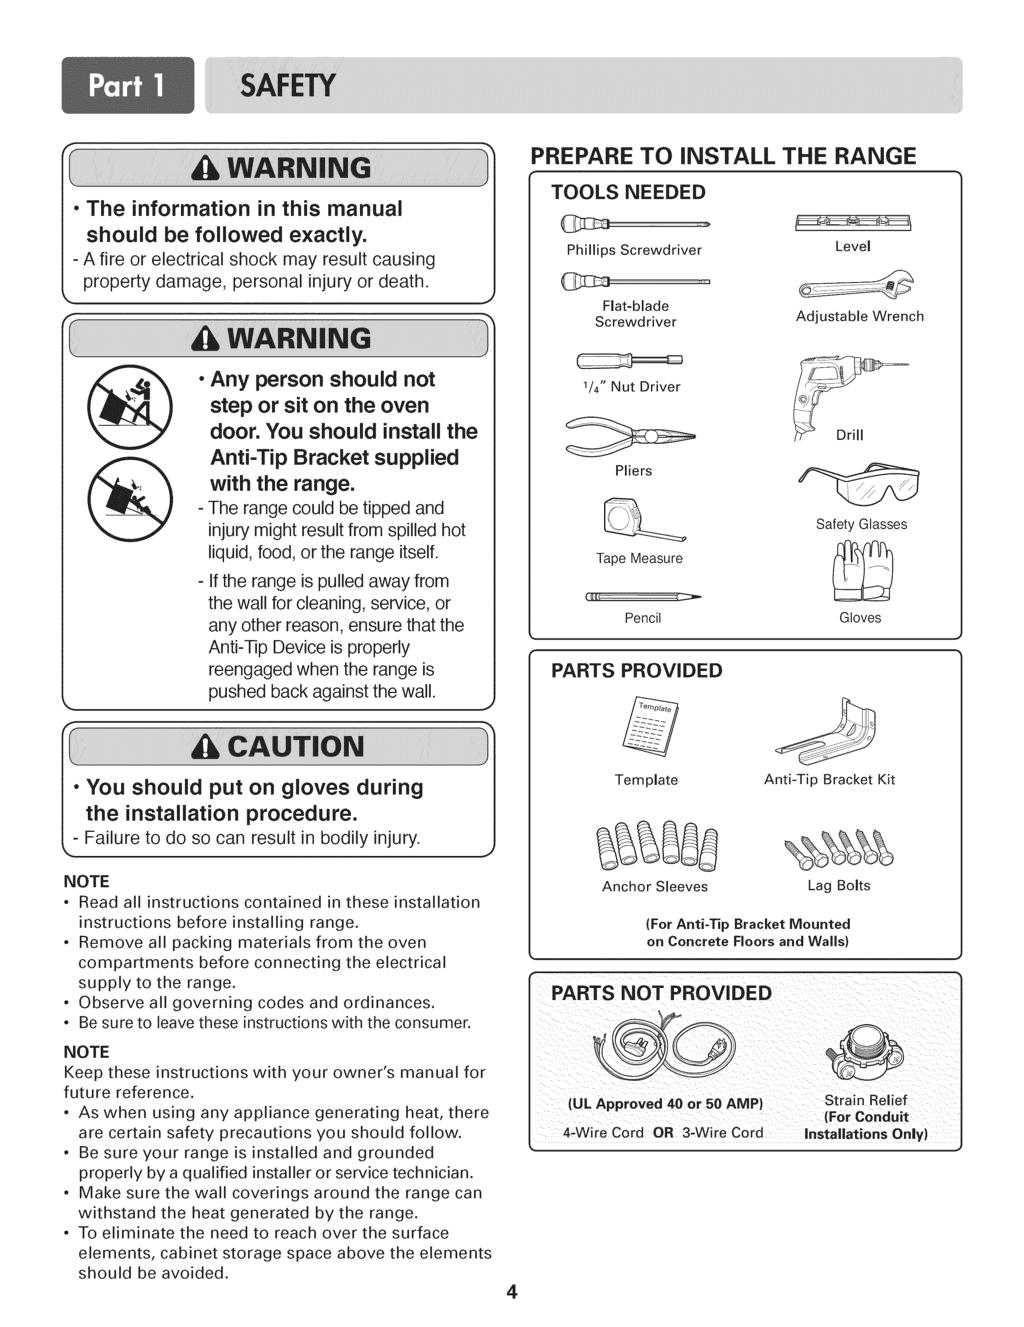 PREPARE TO install THE RANGE The information in this manual should be followed exactly. - A fire or electrical shock may result causing property damage, personal injury or death.